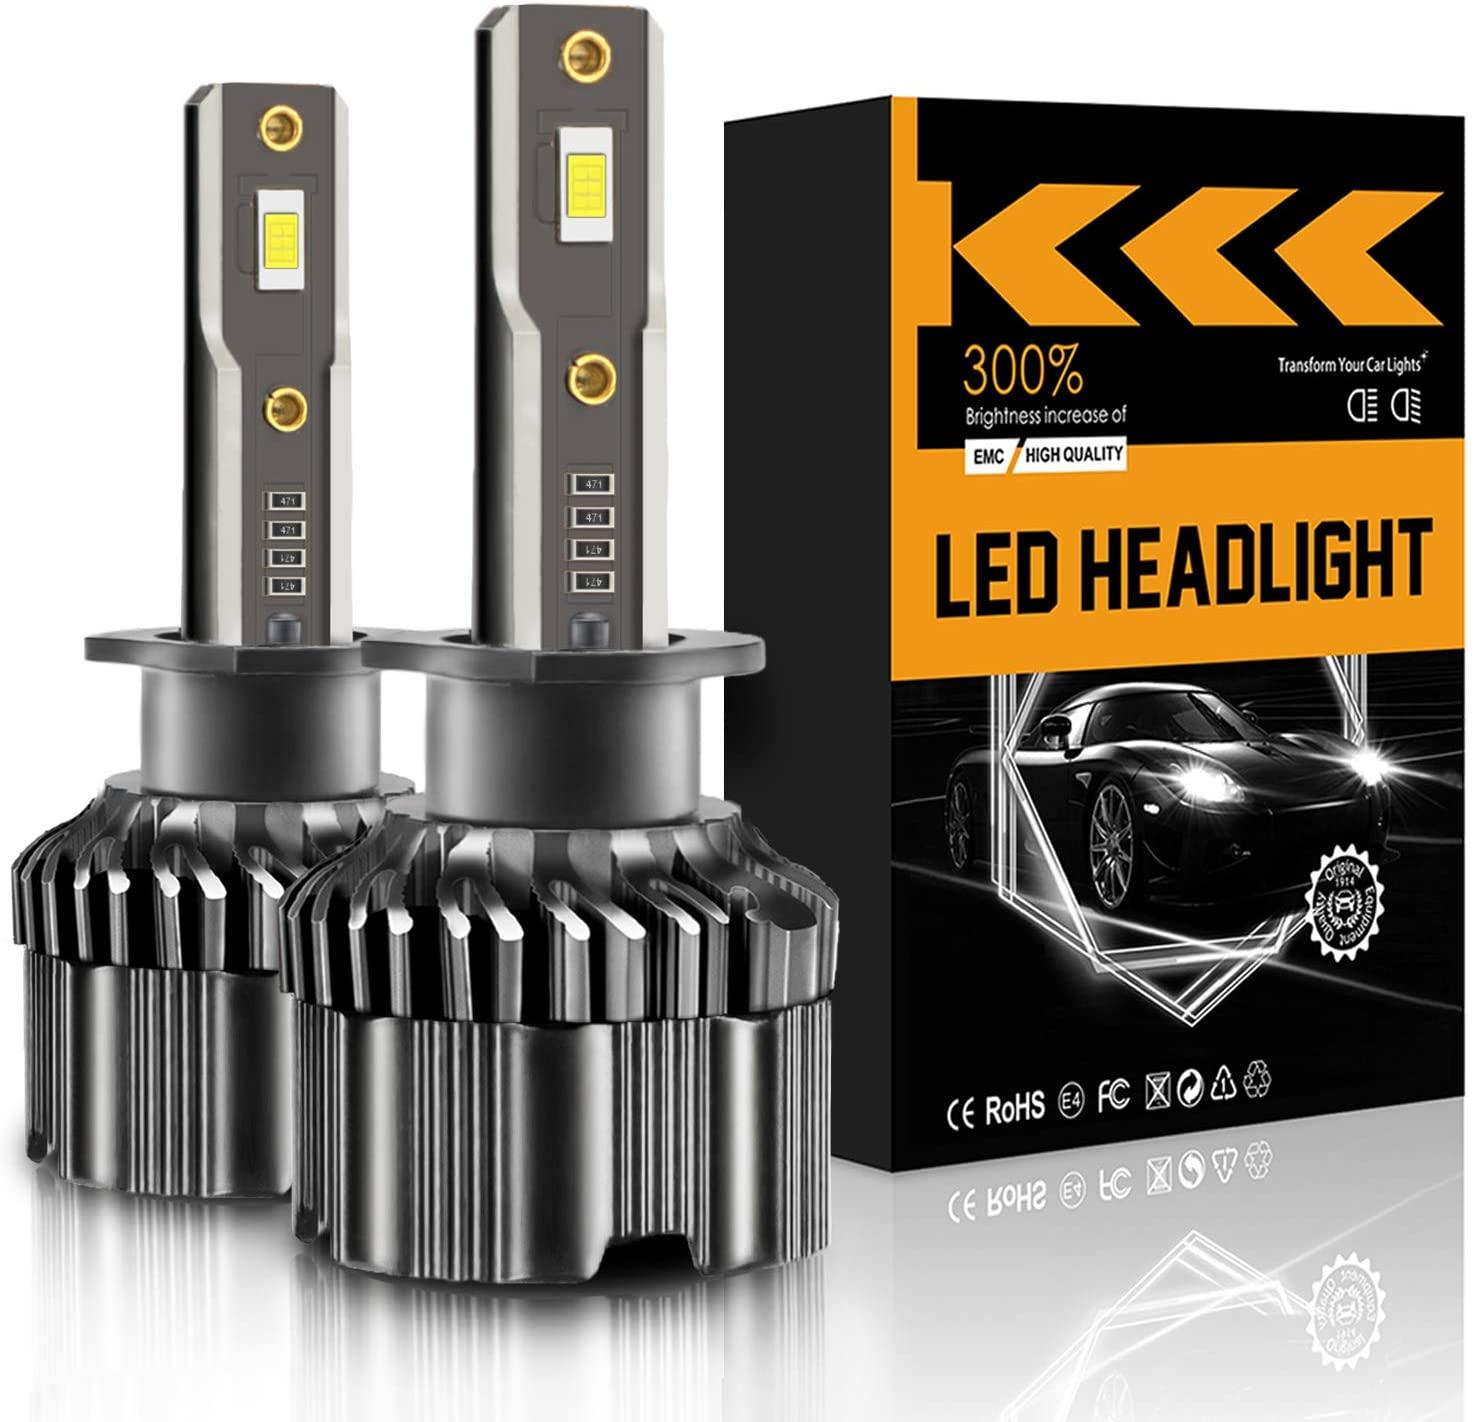 LRTER H1 LED Headlight Bulbs 60 W 12000 Lumens Extremely Bright 6000K Upgraded CSP Chips Conversion Kit Halogen Replacement